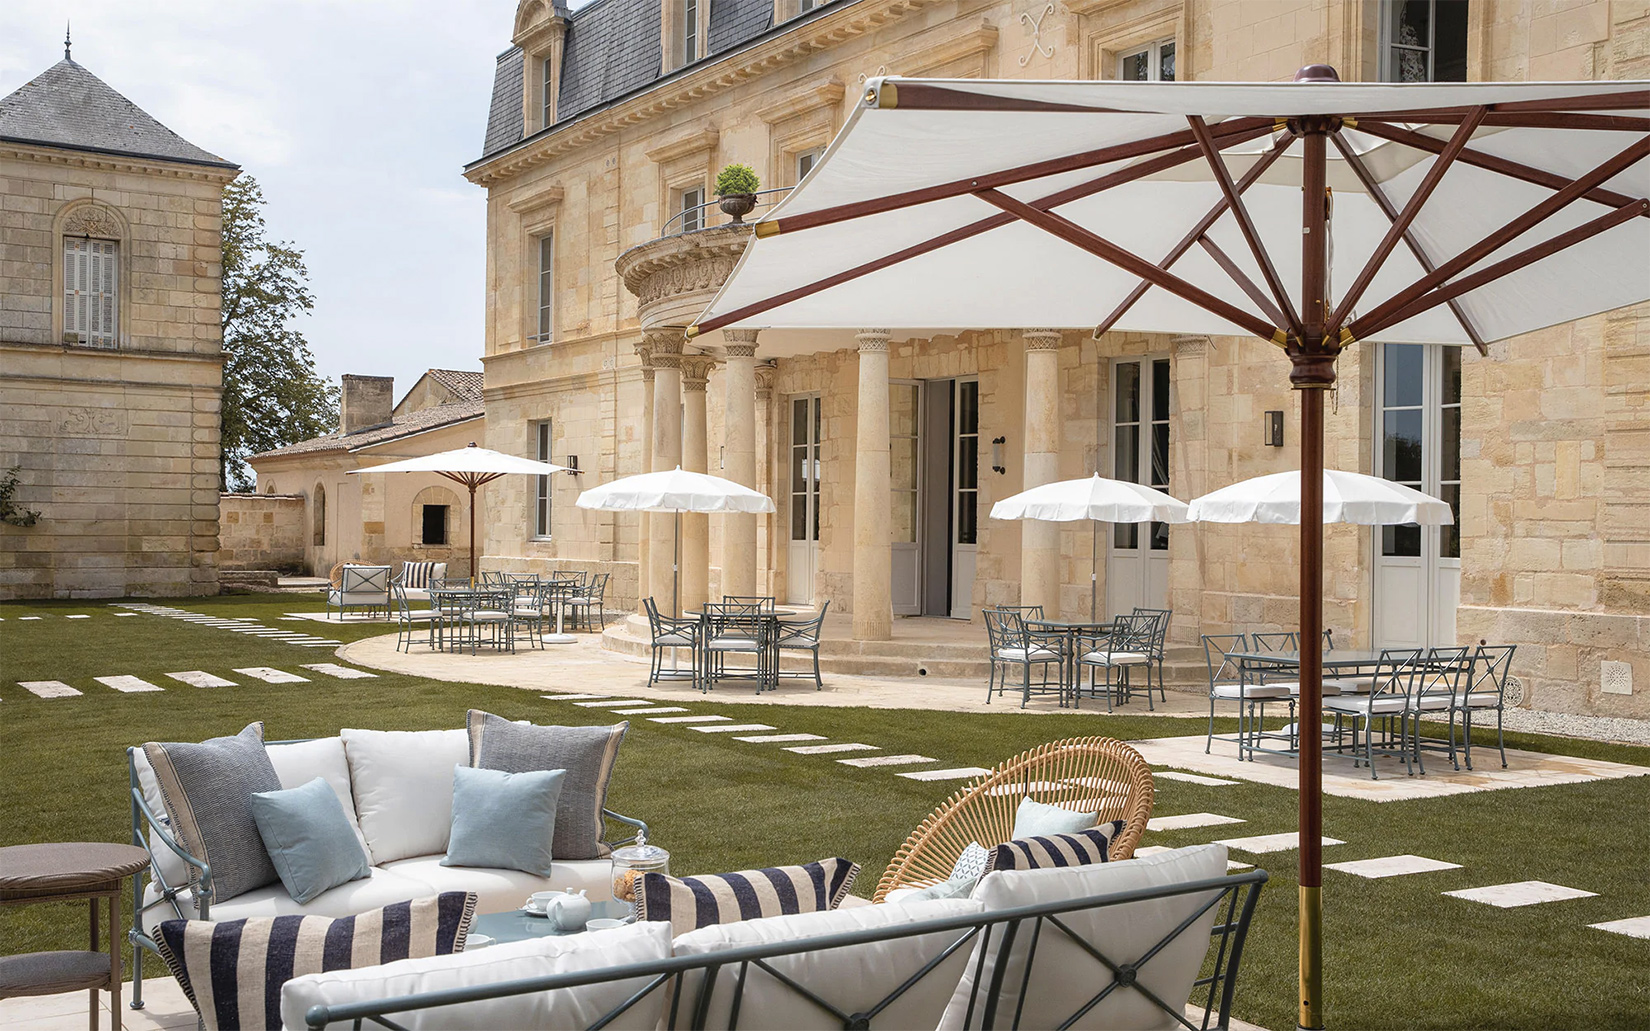 Grand French chateau La Maison d’Estournel has reopened as a hotel